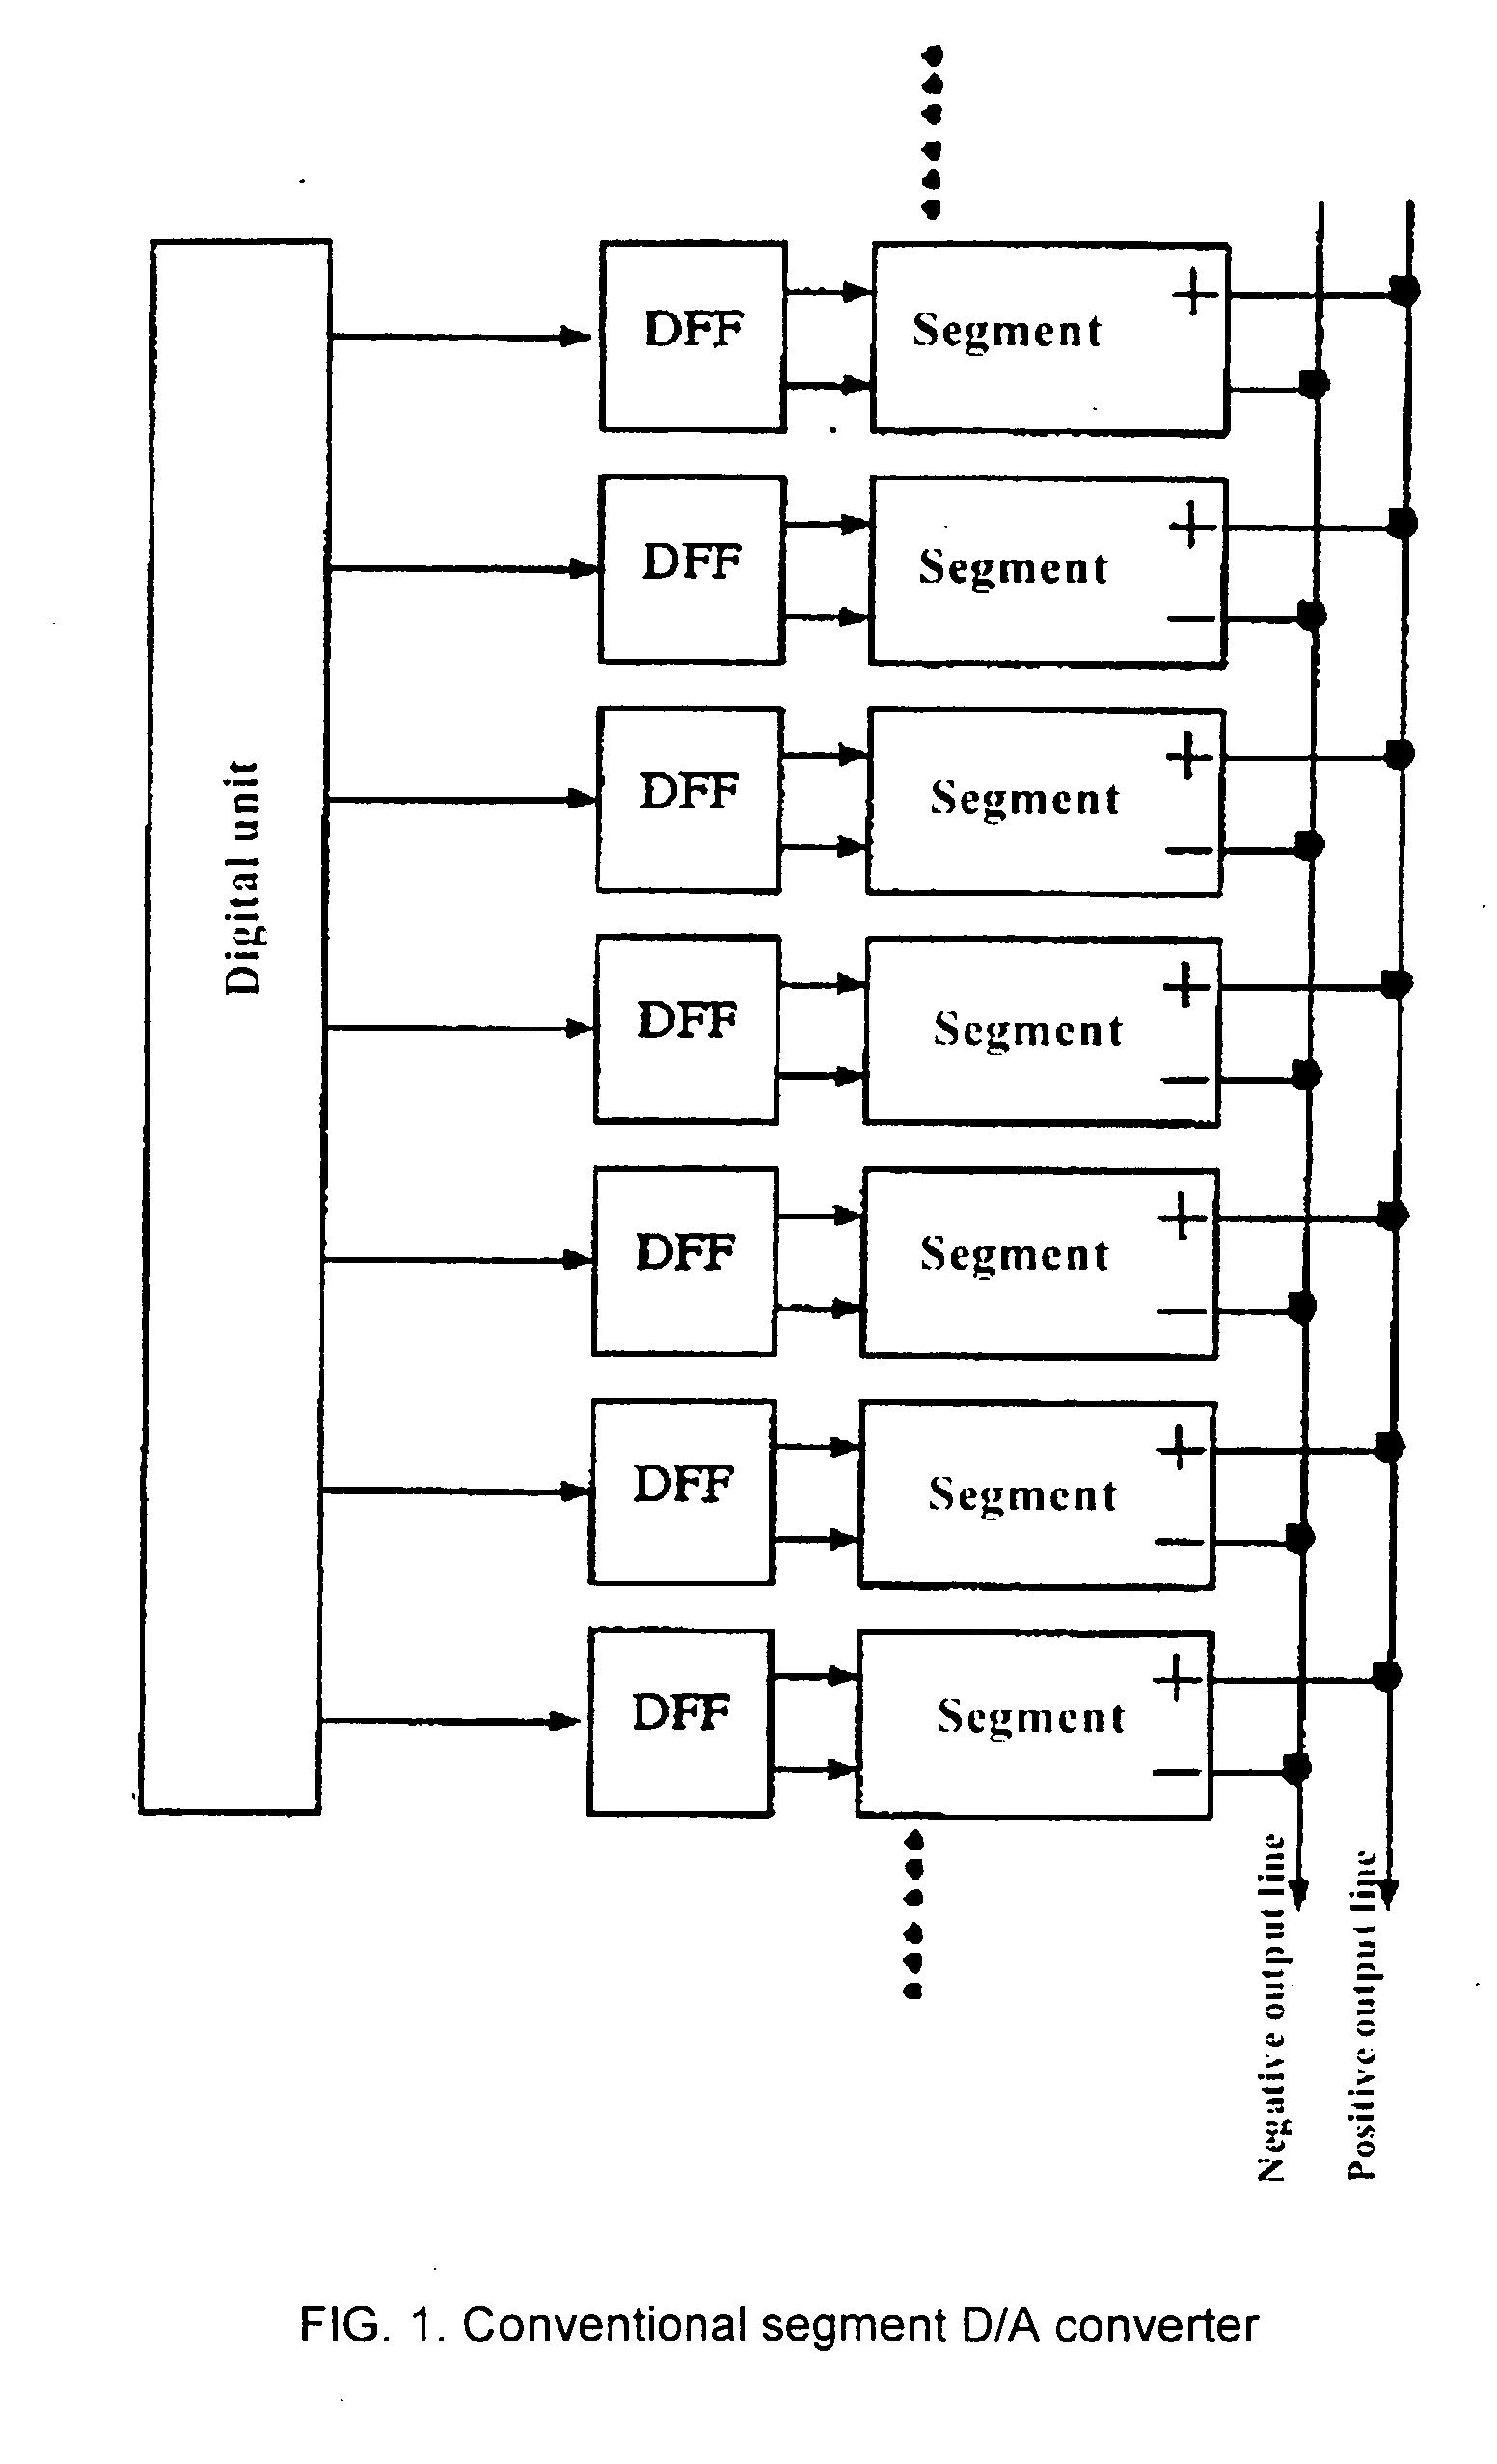 Method and apparatus for forming transient response characteristics